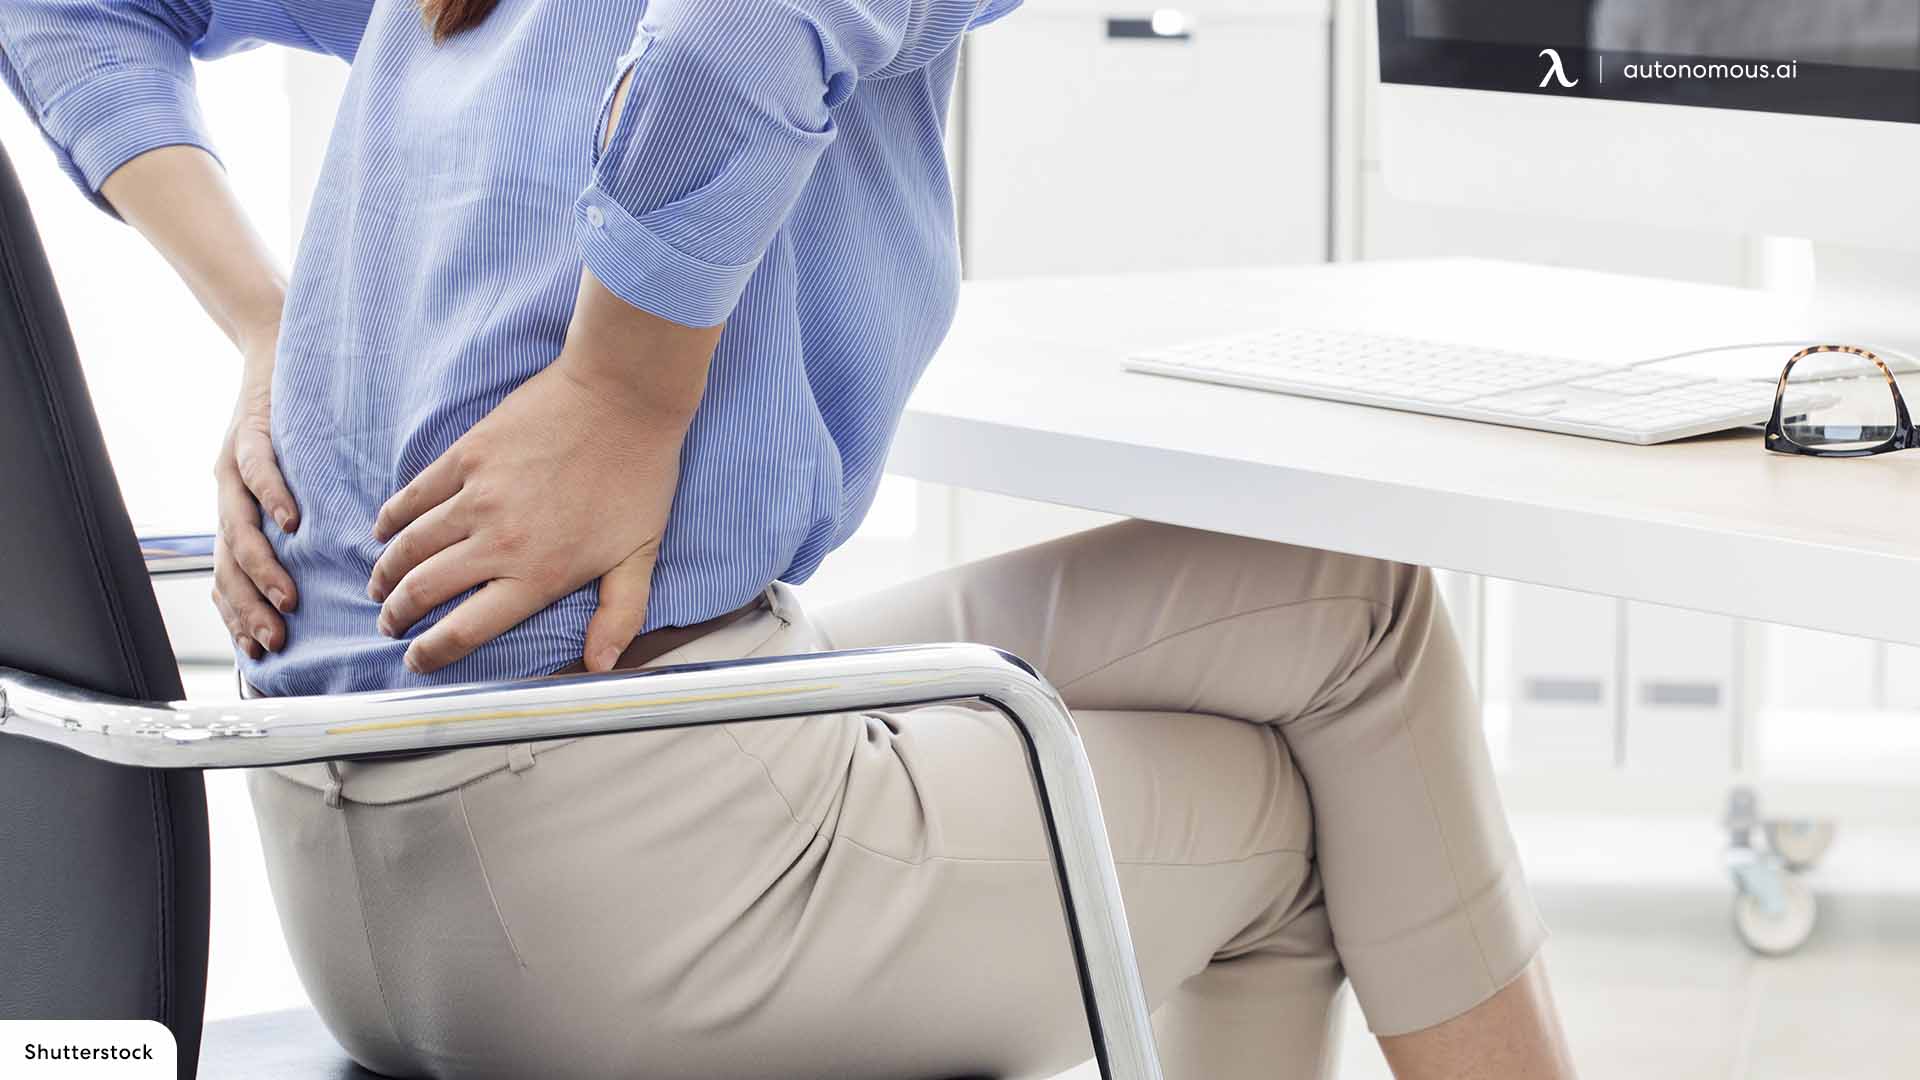 What to Do to Relieve Hip Sore from Sitting